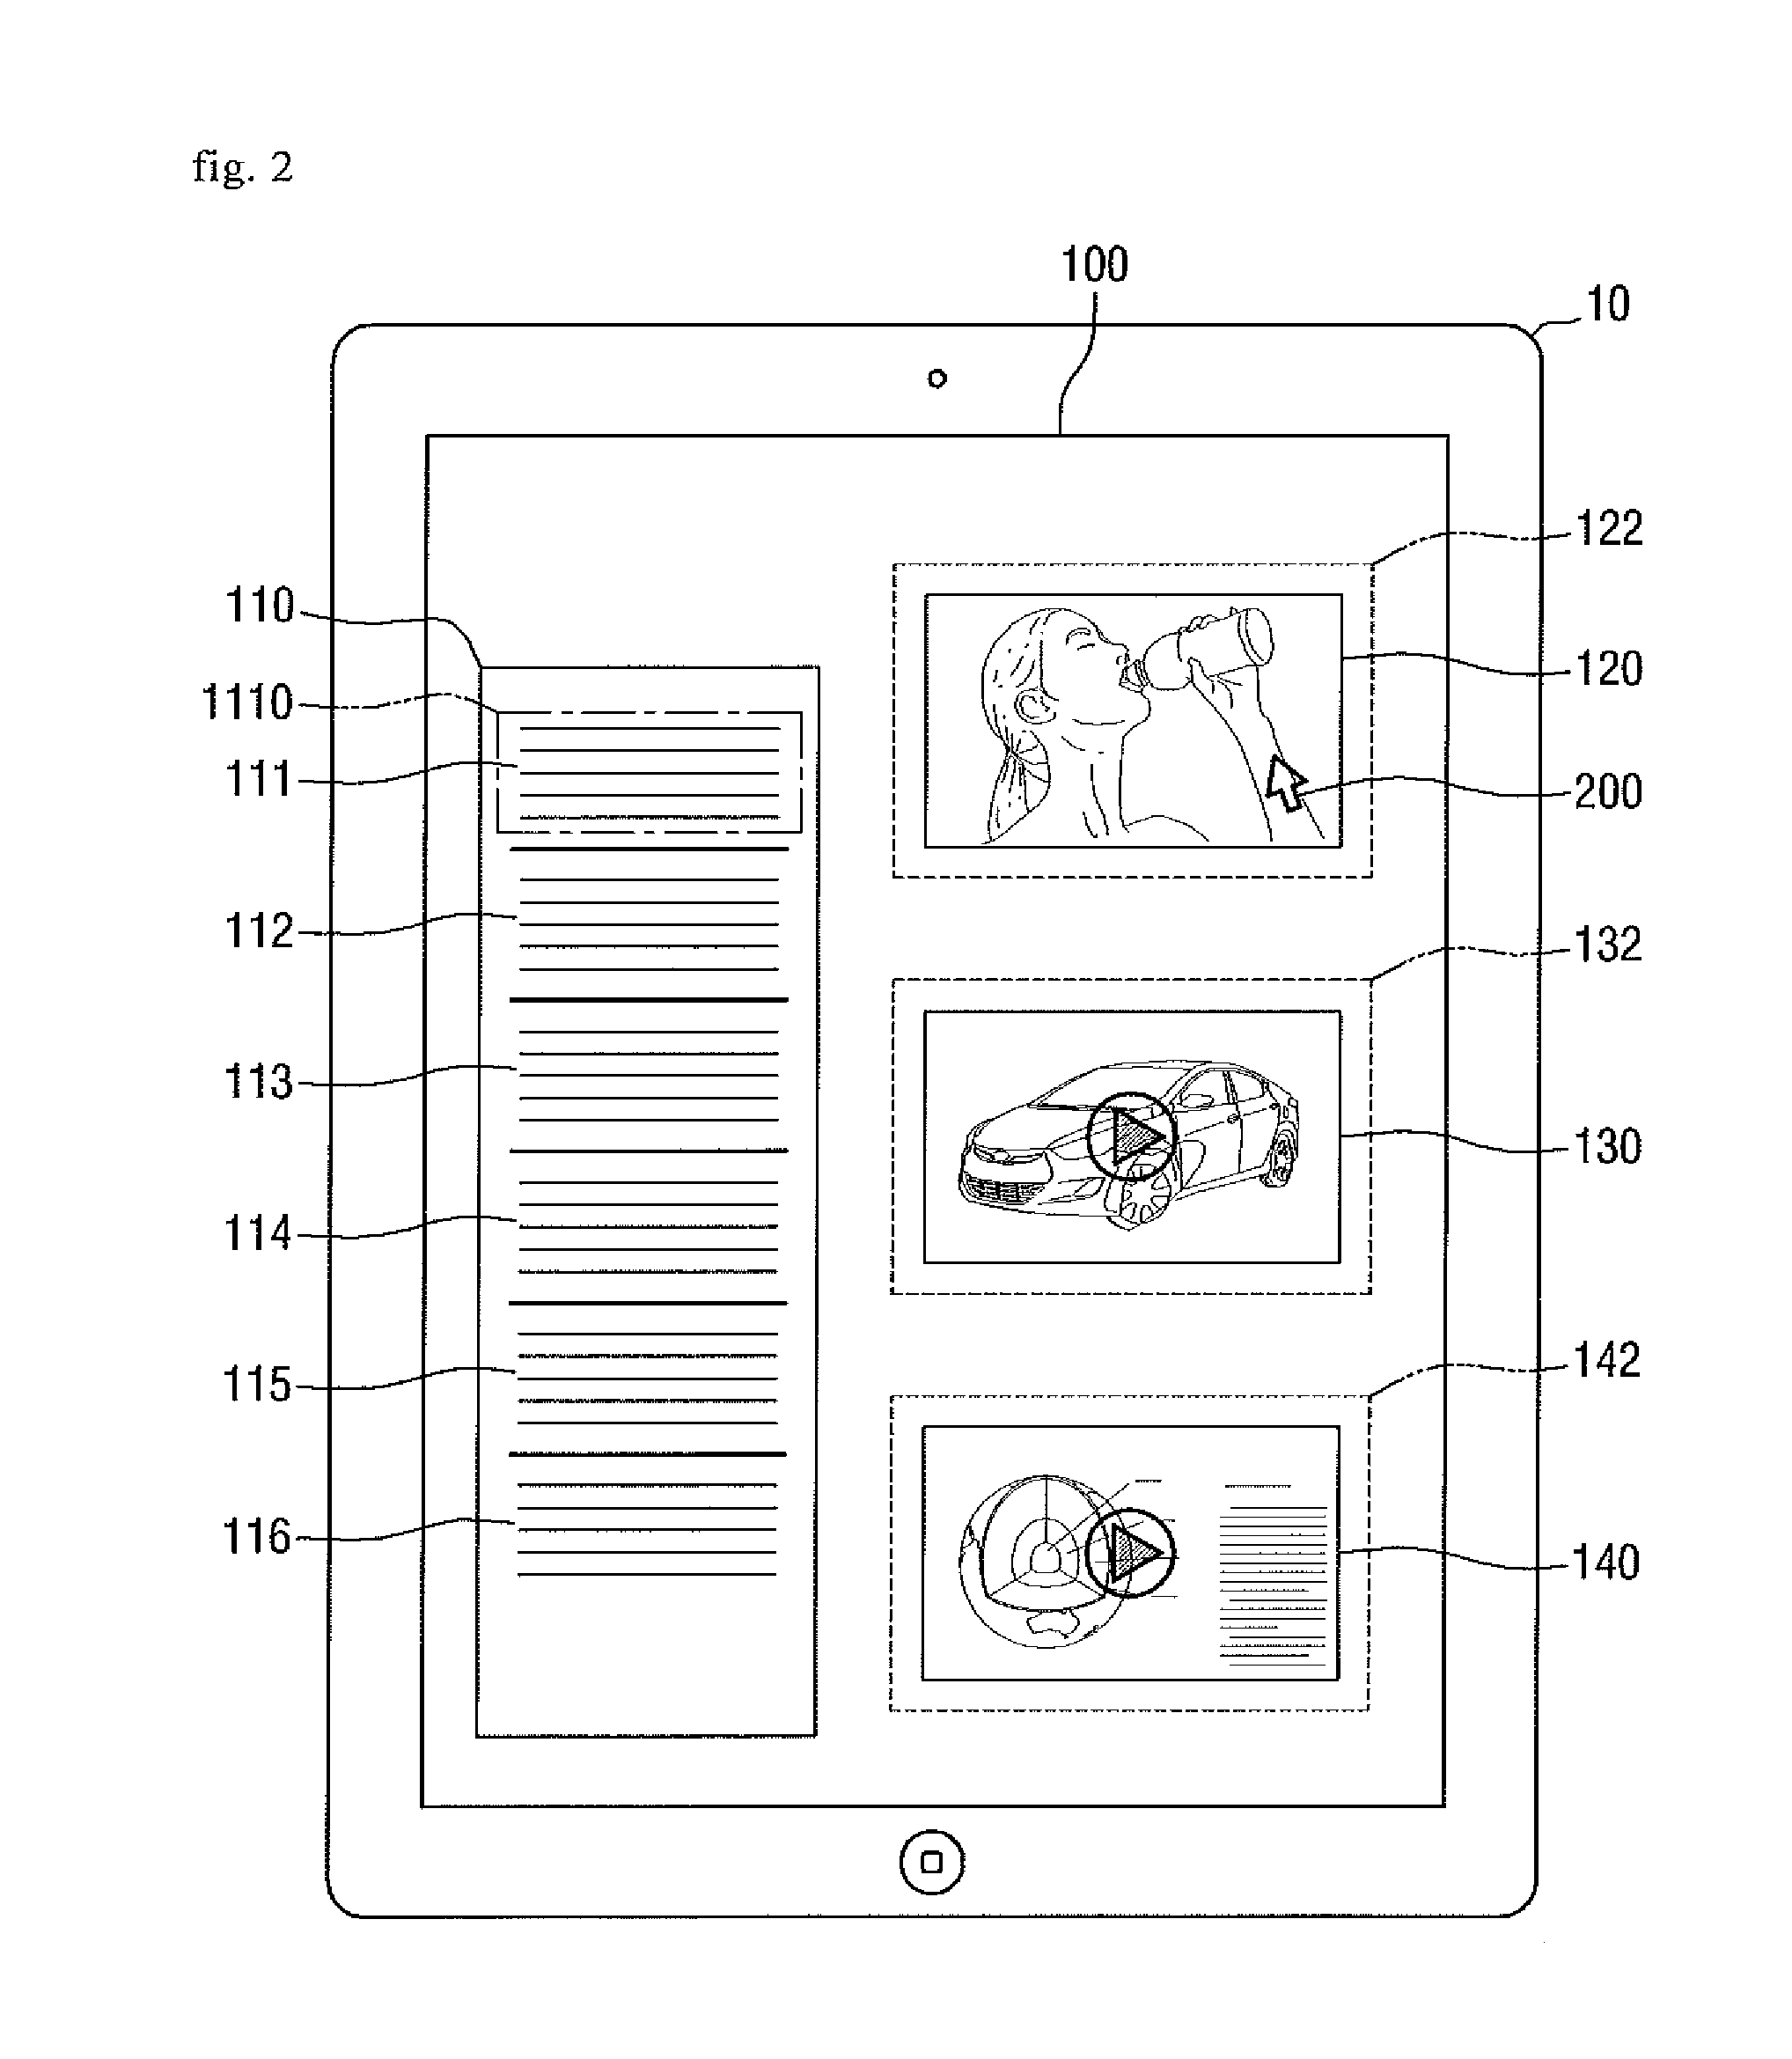 Method for increasing GUI response speed of user device through data preloading, and said user device